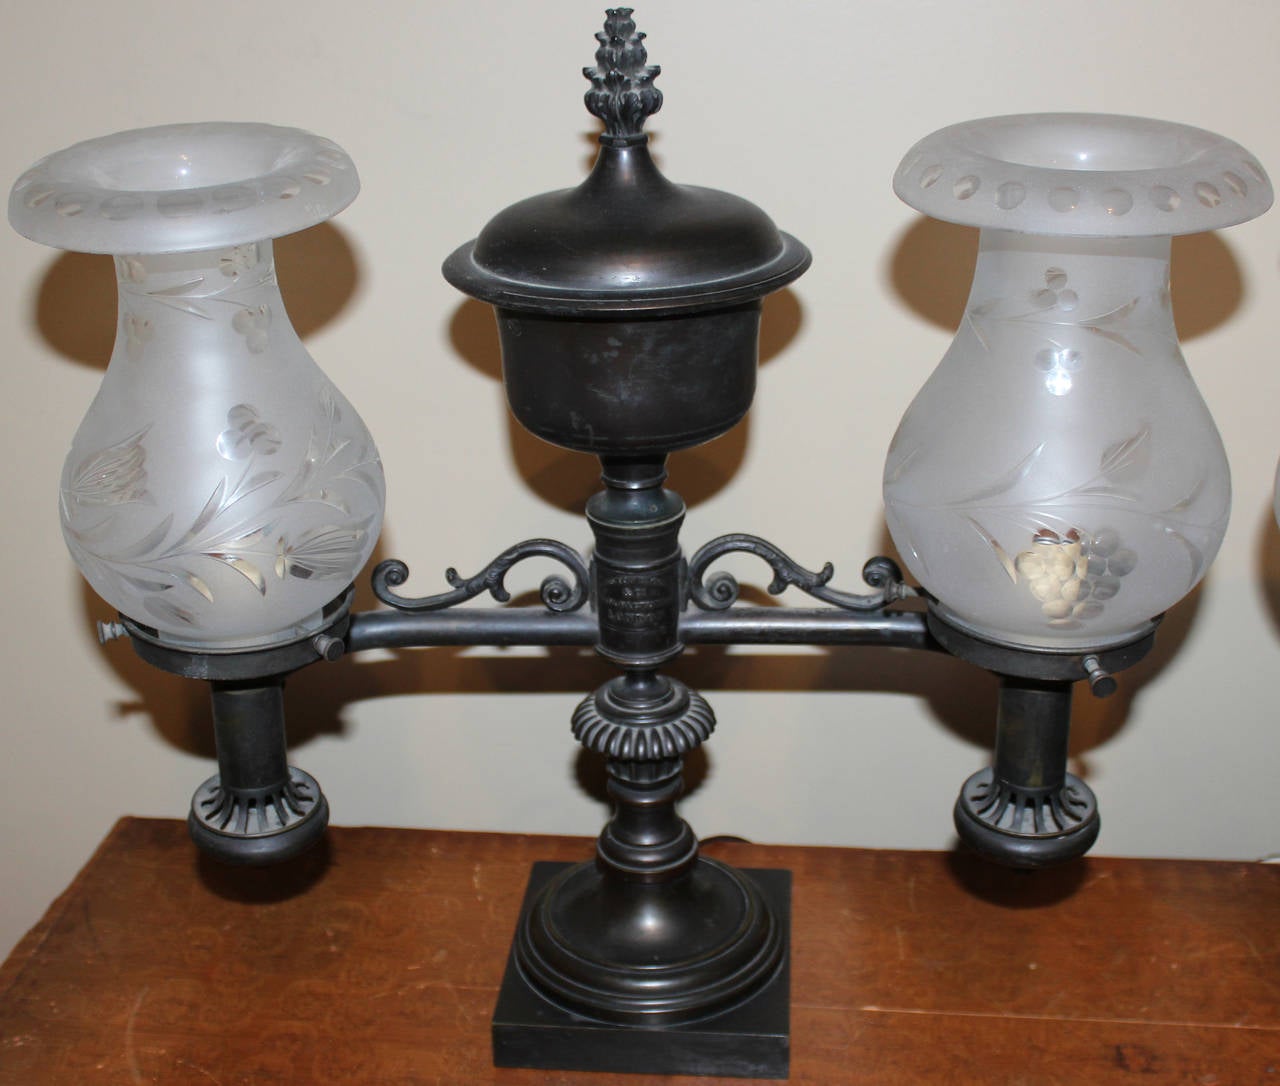 Pair of bronze double burner Argand lamps, English, mid-19th century,
Central pedestal with urn form pediment and square base. Two flanking arms support burners with wheel etched glass frosted shades. Each lamp shows a label “Johnston Brookes & Co.